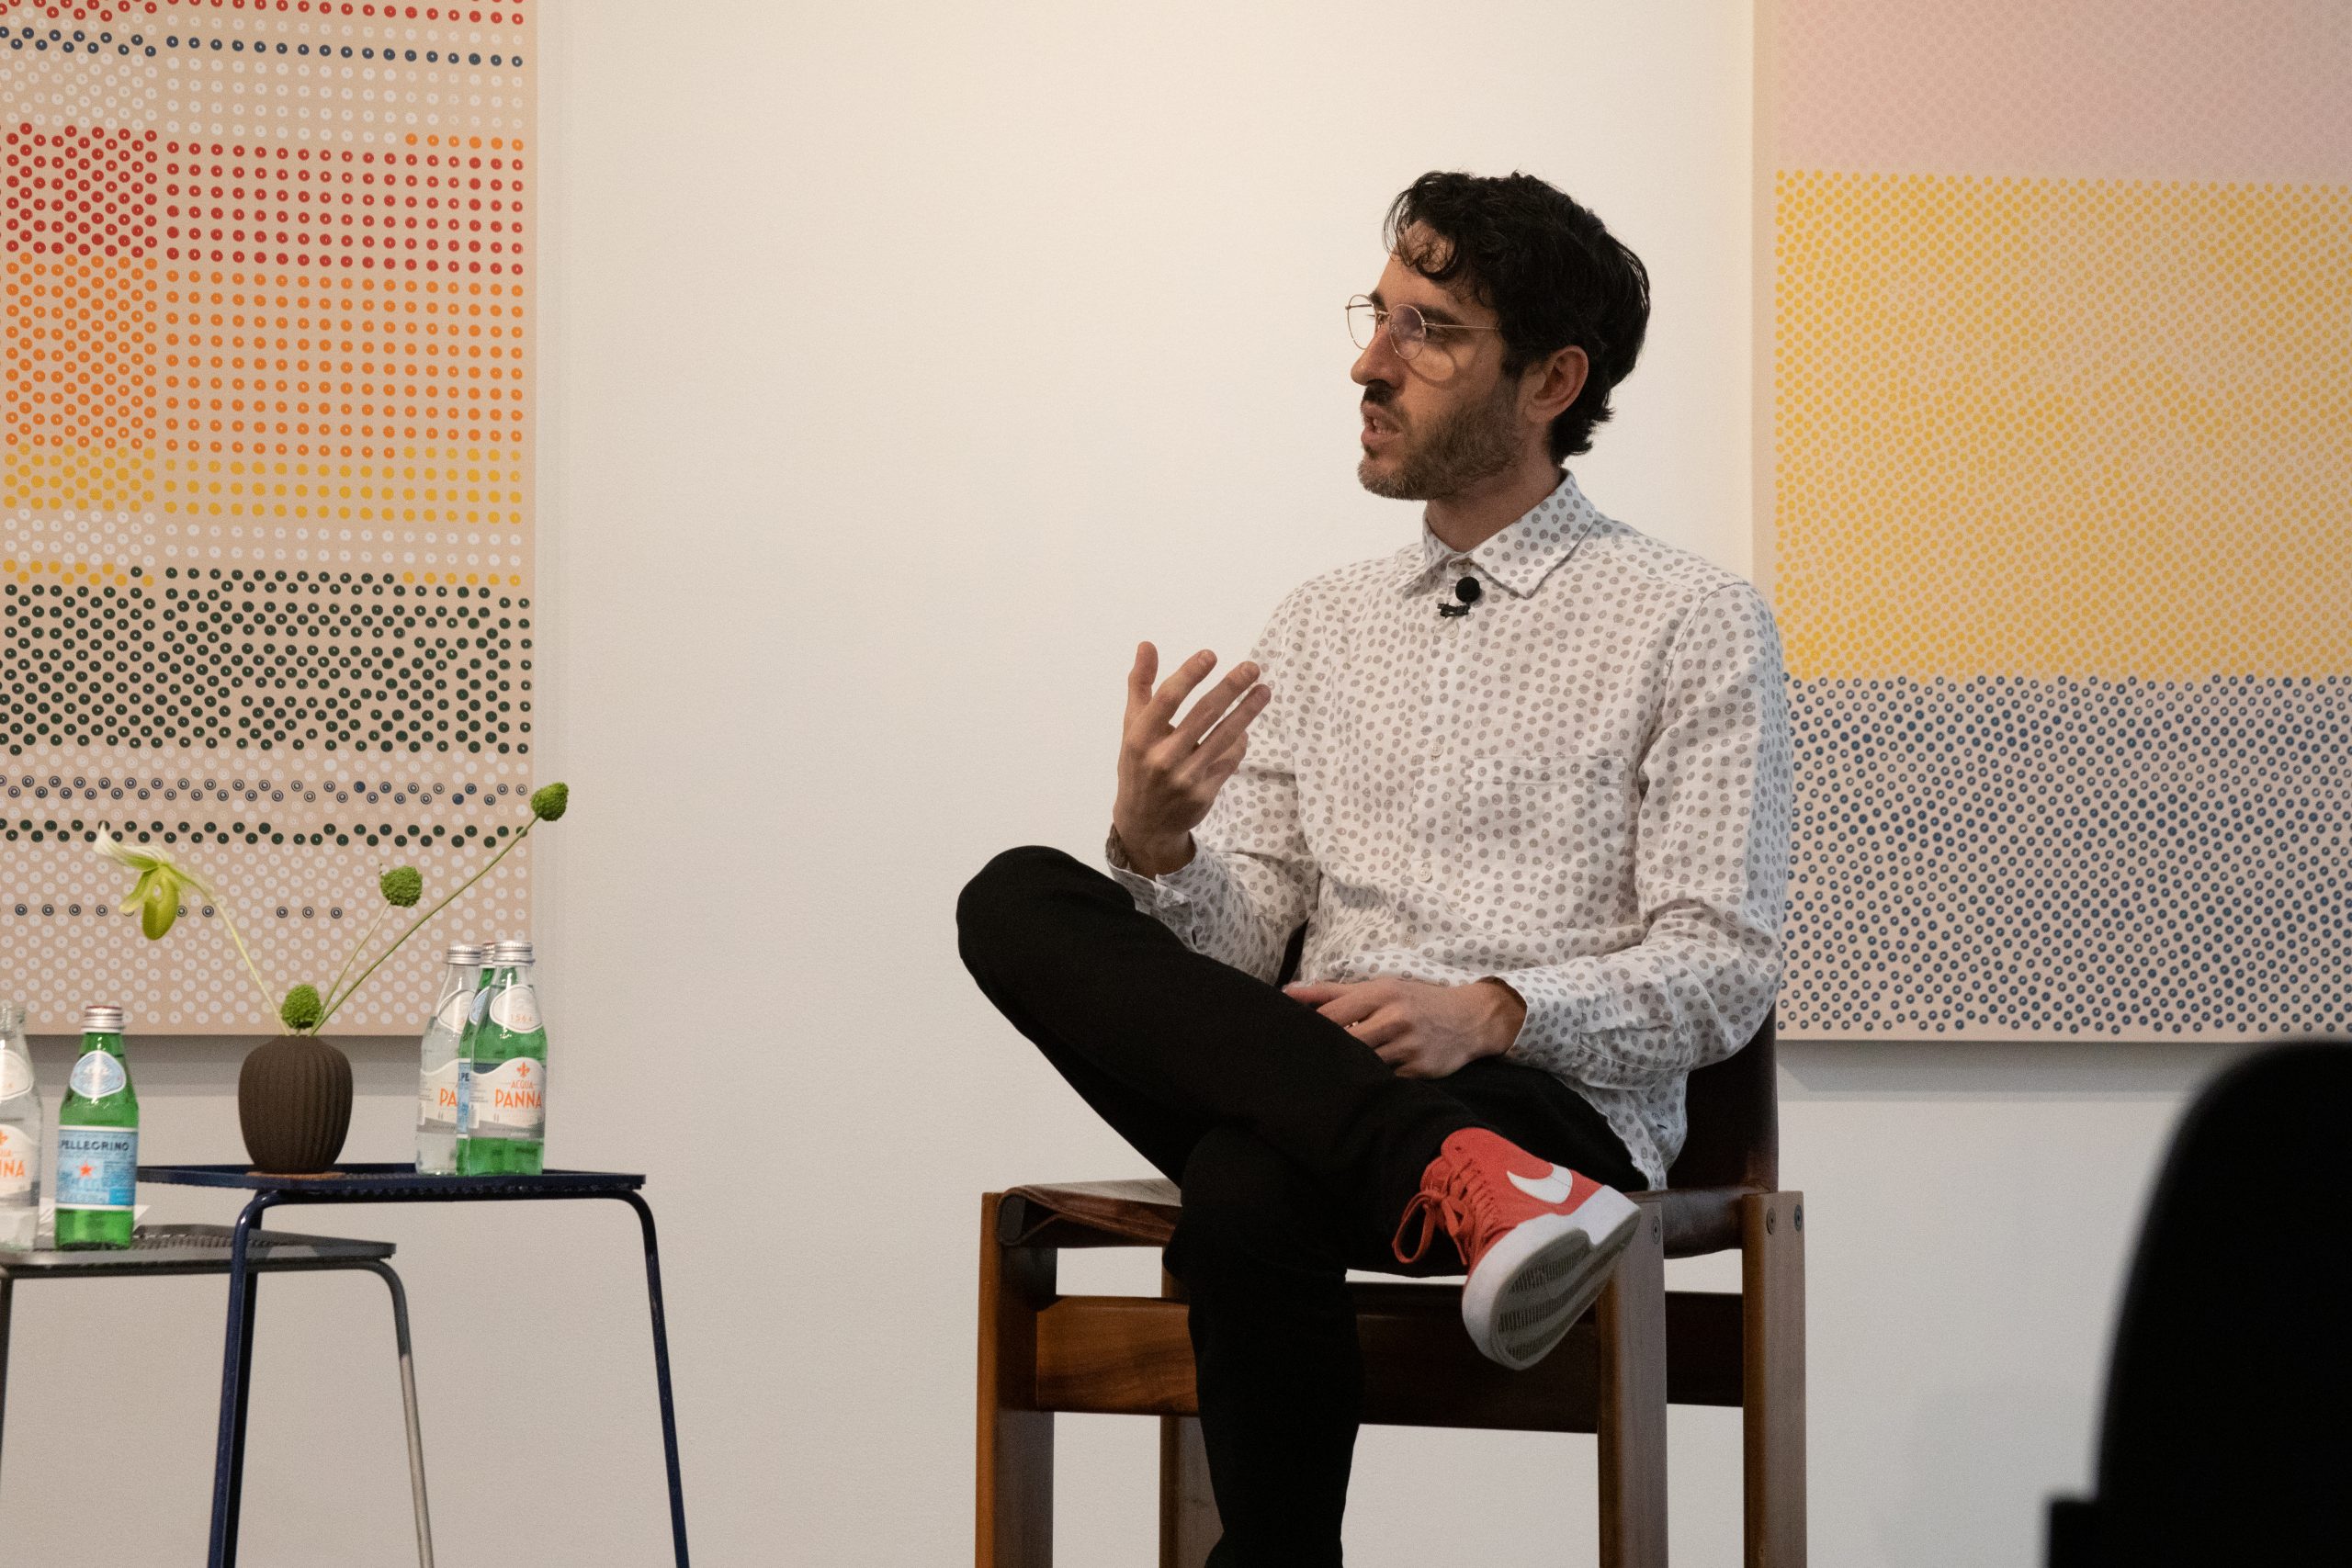 A seated man in a patterned shirt speaks to an audience in front of contemporary artwork